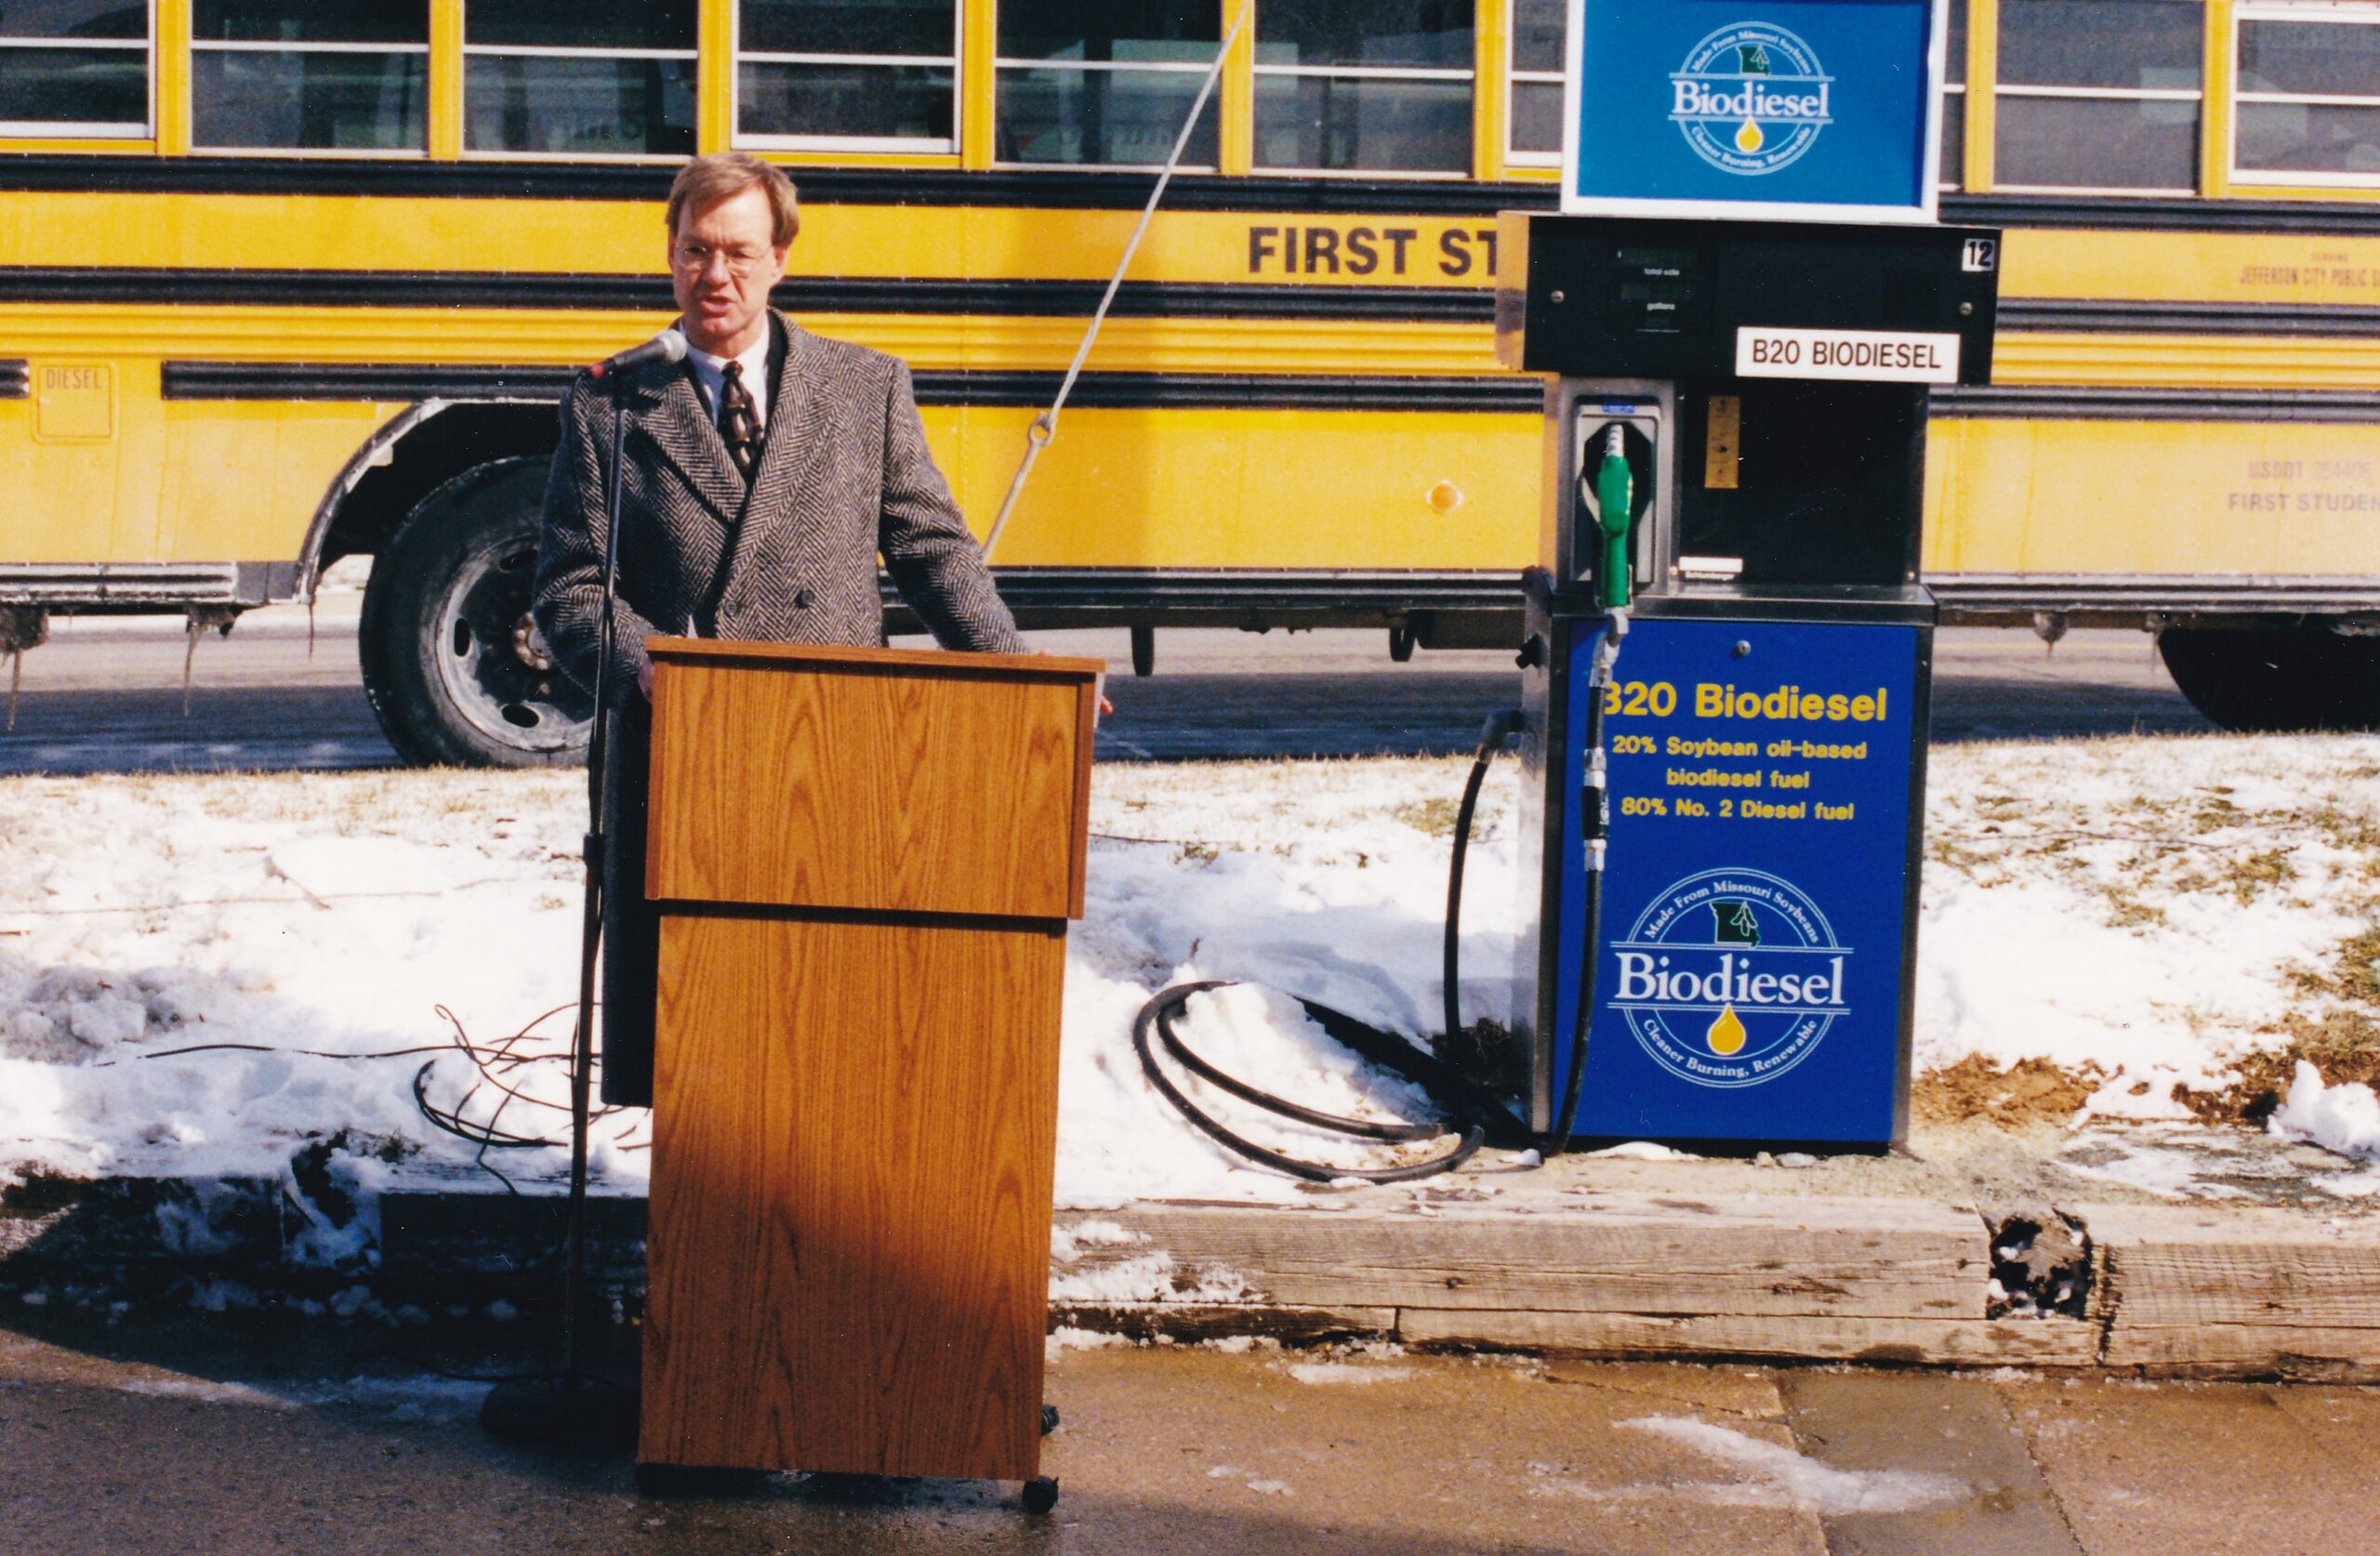 Man giving a speech in front of a biodiesel pump and a school bus